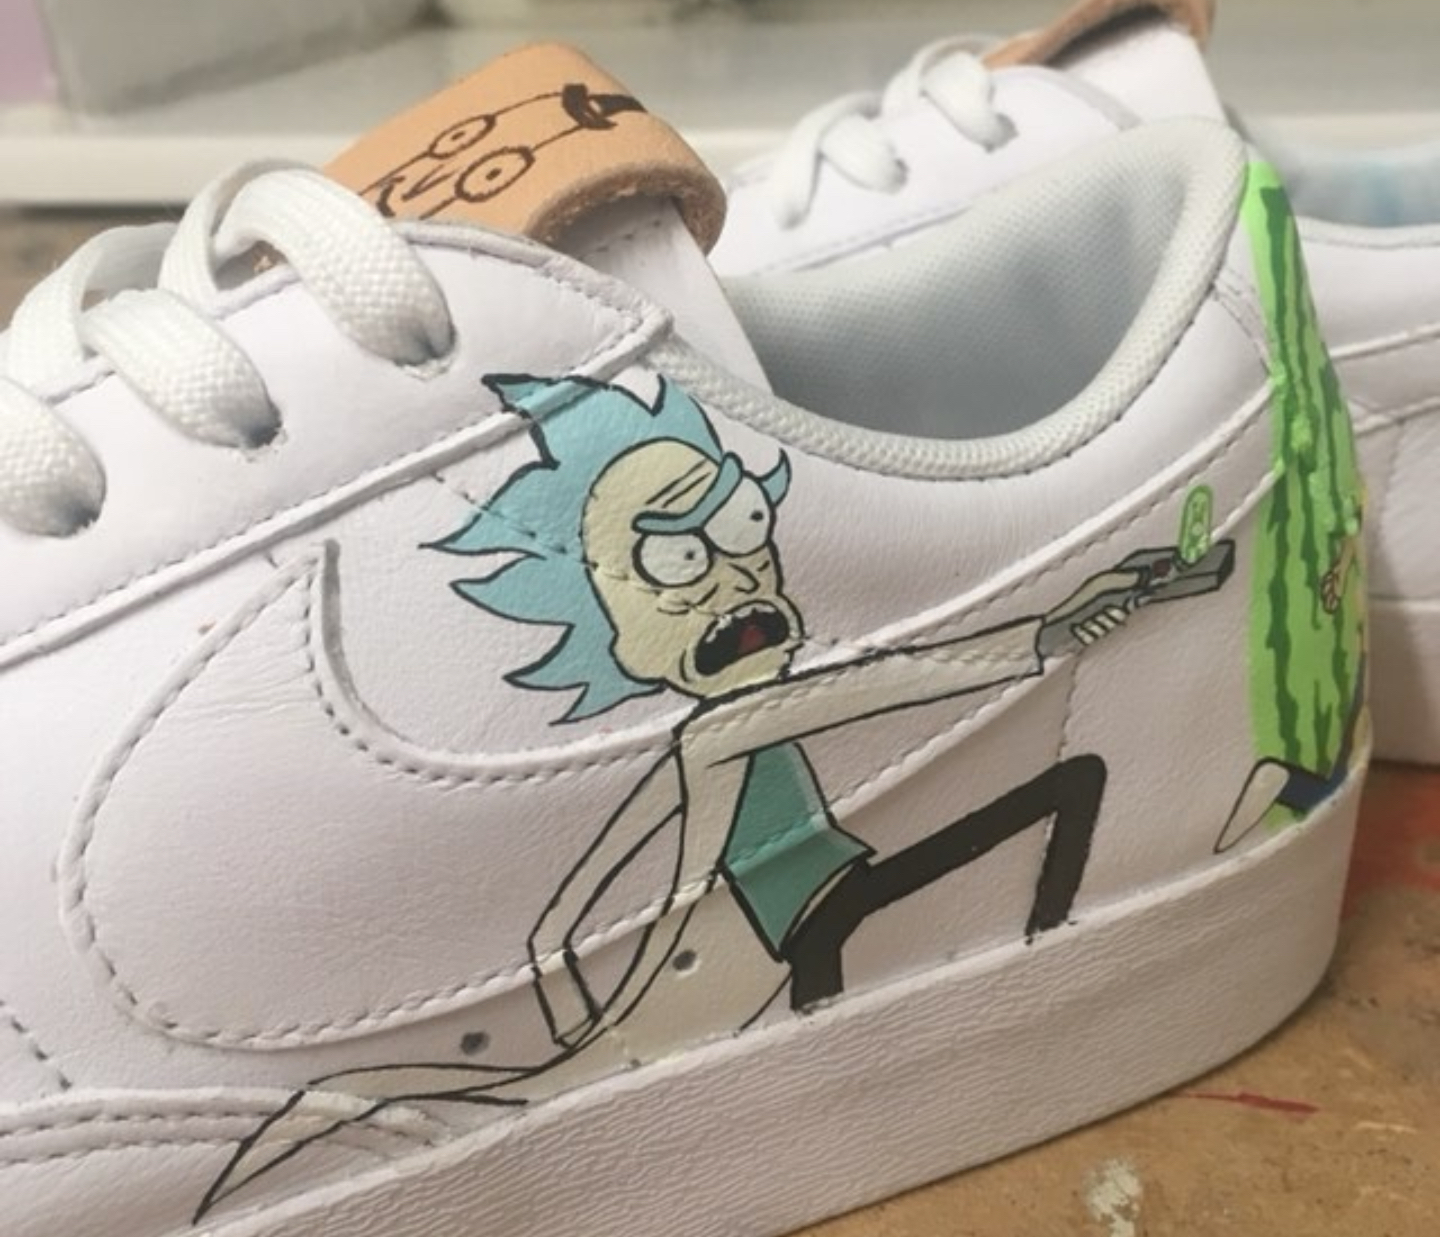 Check Out These Rick and Morty Customs by Tornschuhjette ...